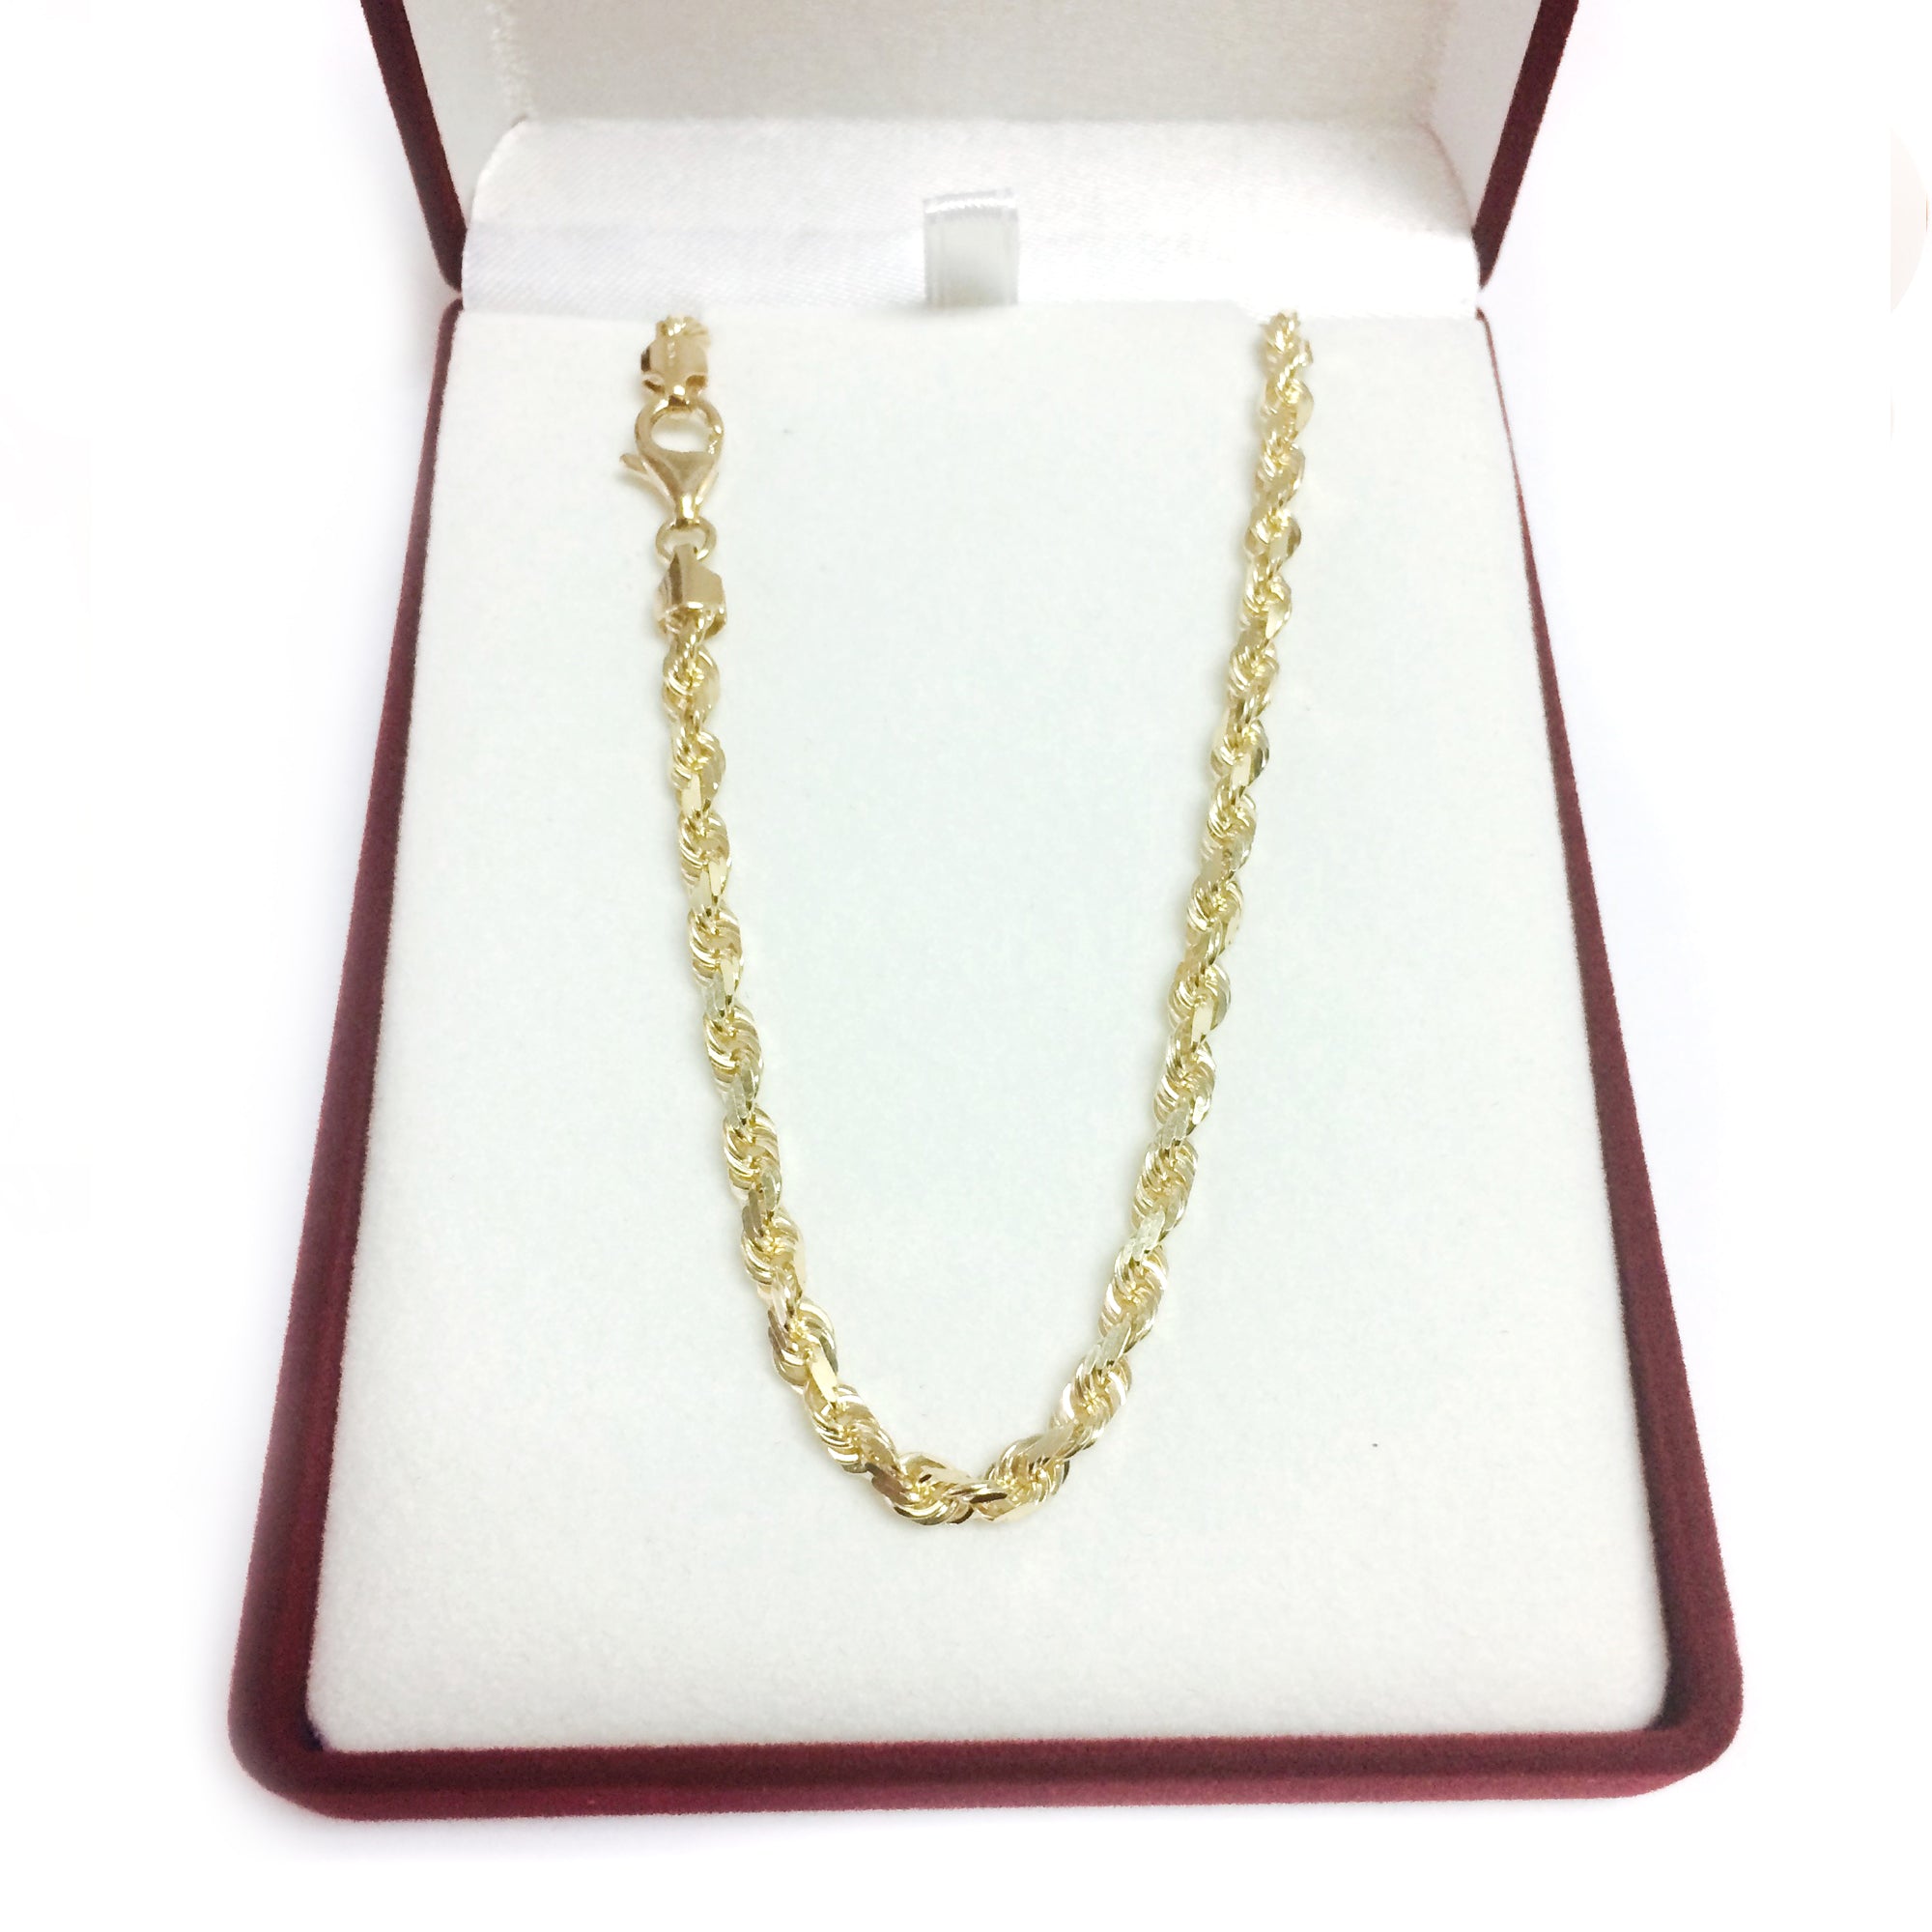 Jewelry Affairs 14k Yellow Solid Gold Diamond Cut Rope Chain Necklace,  2.25mm